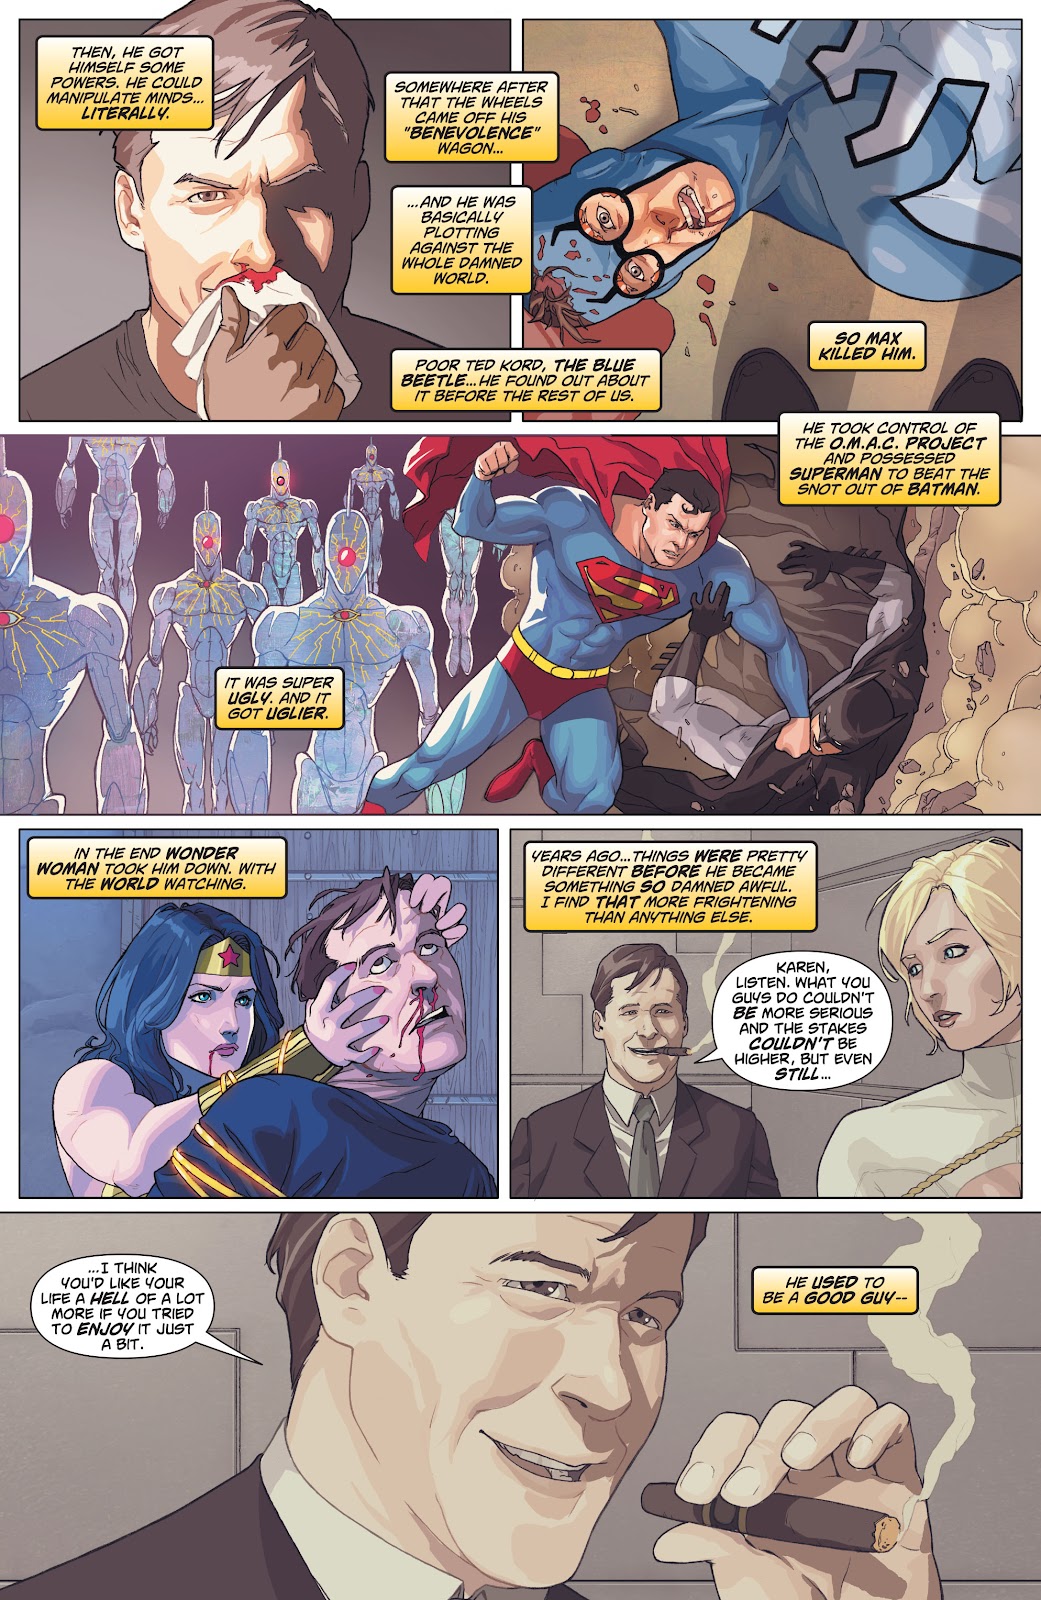 Power Girl (2009) issue 13 - Page 4